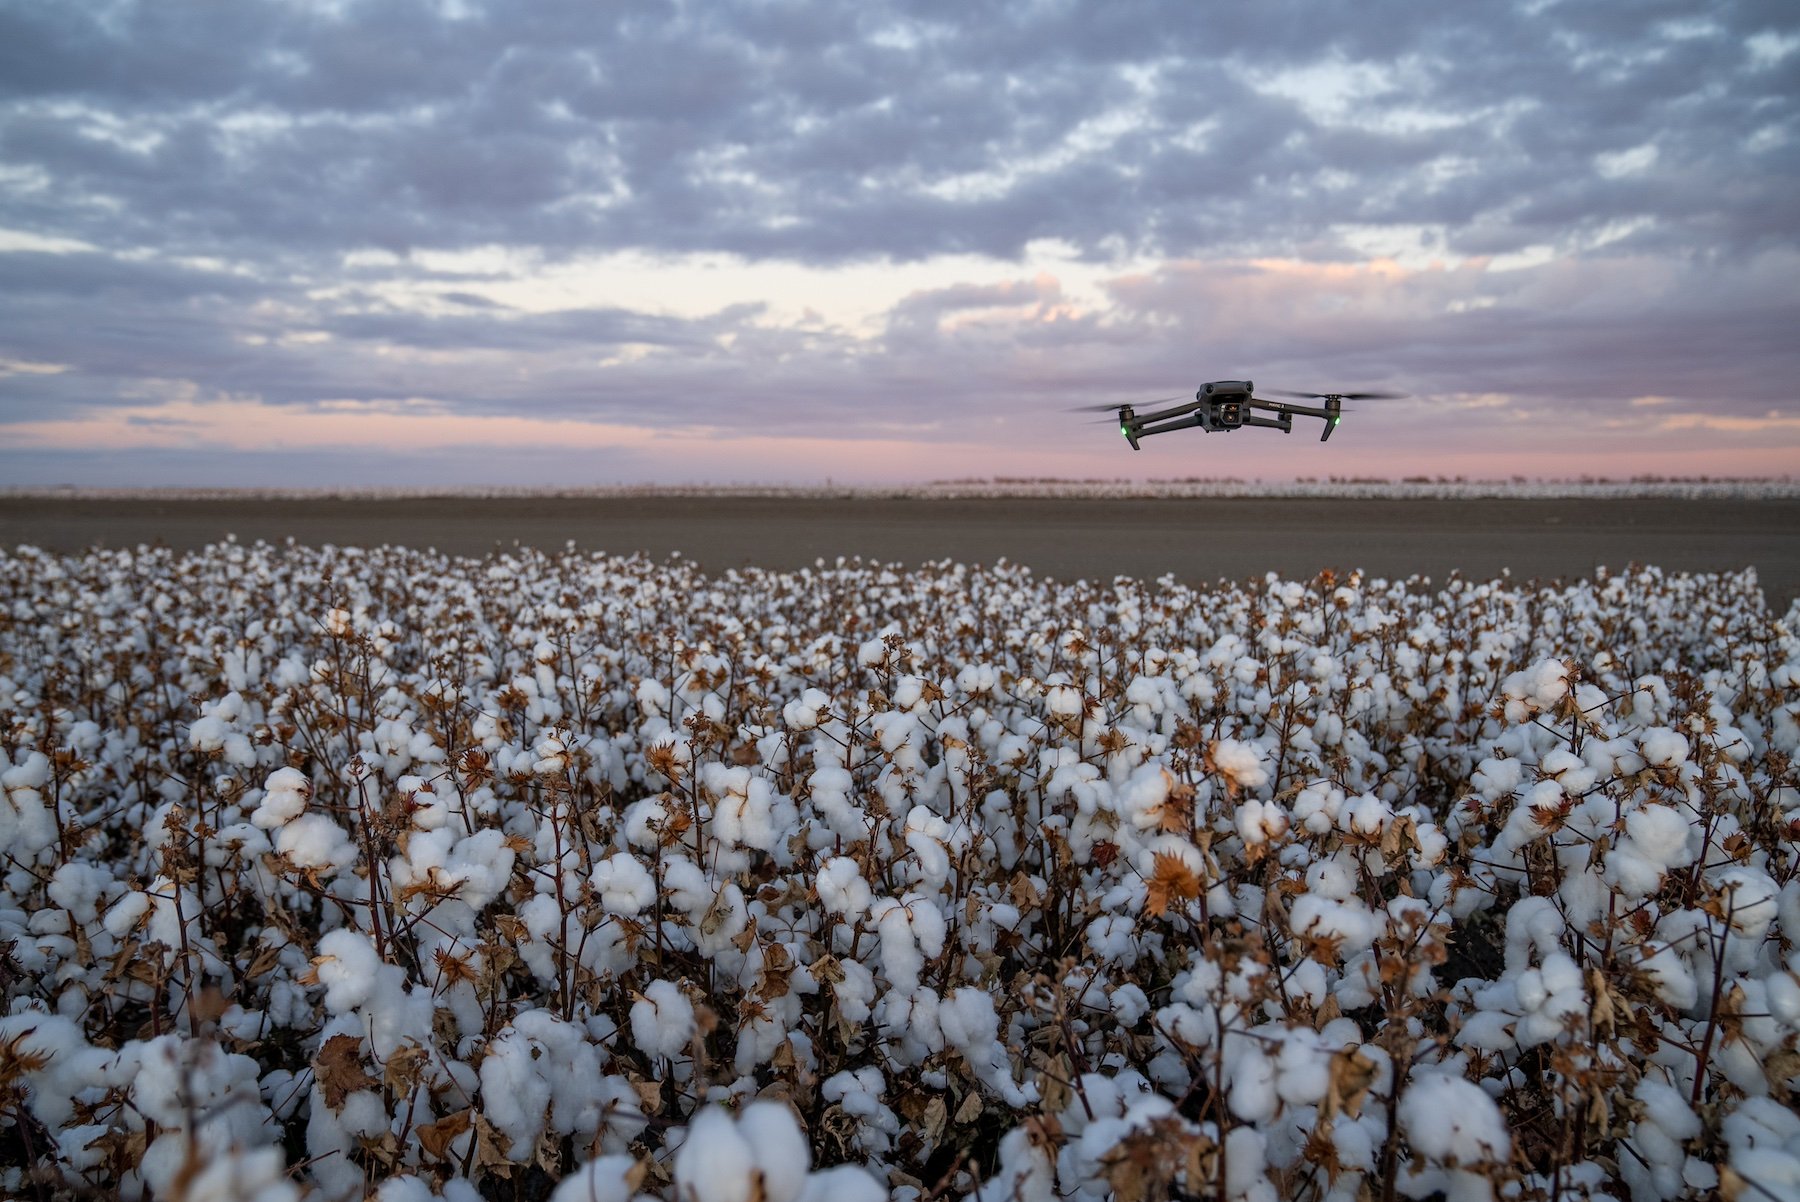 Drones over cotton field_Agrishots